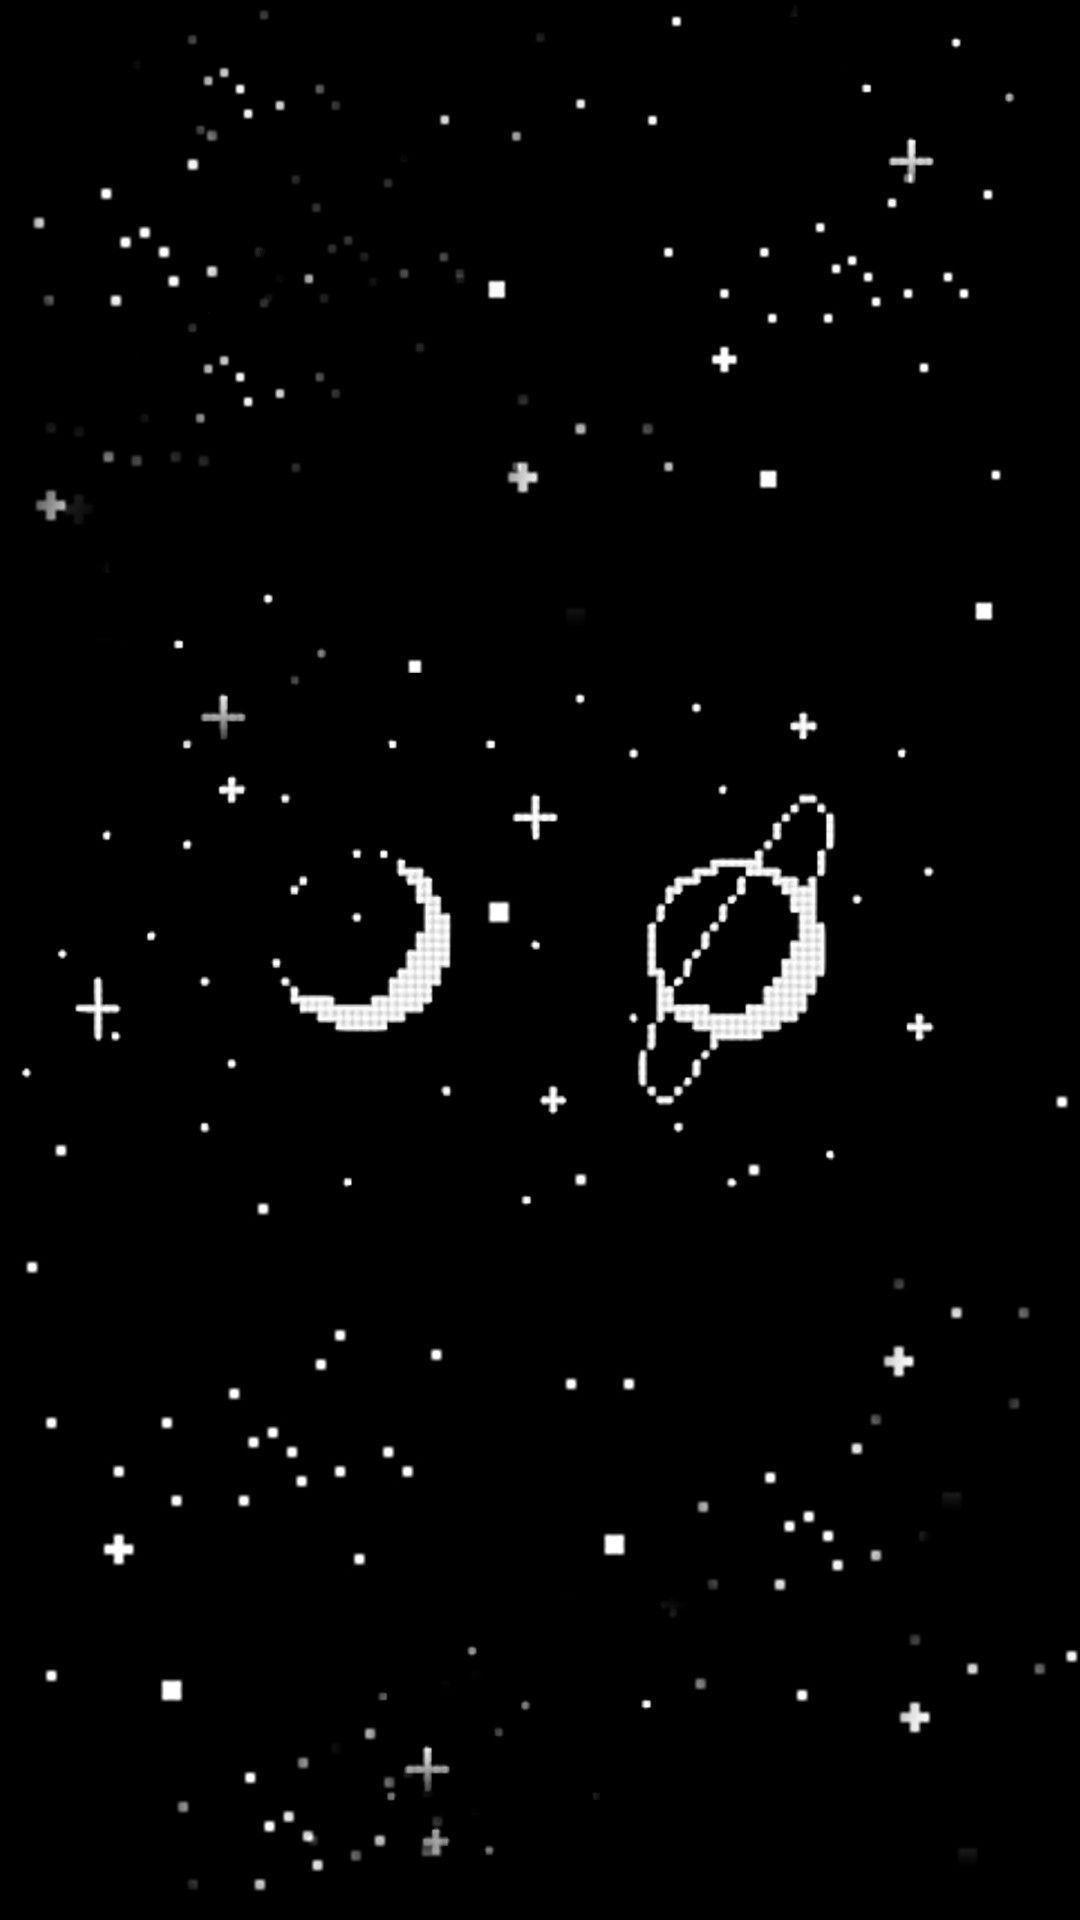 A black background with white stars and two planets - Black phone, black, dark, black and white, dark phone, profile picture, pixel art, space